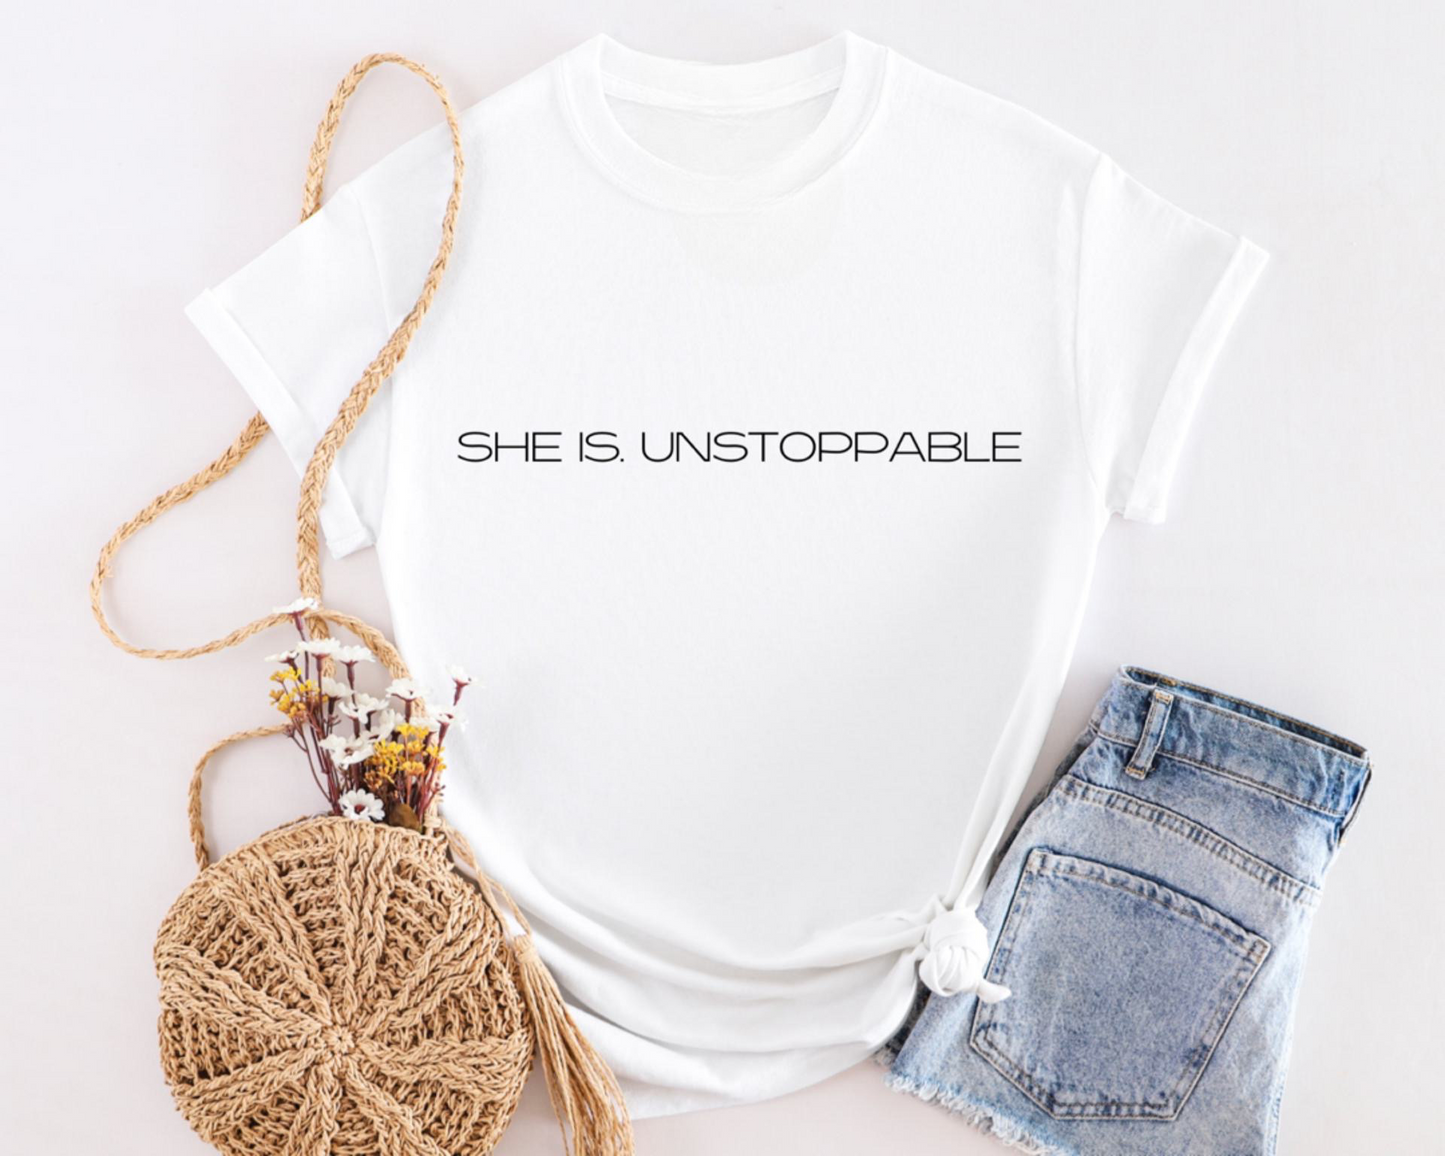 SHE IS. UNSTOPPABLE Tee